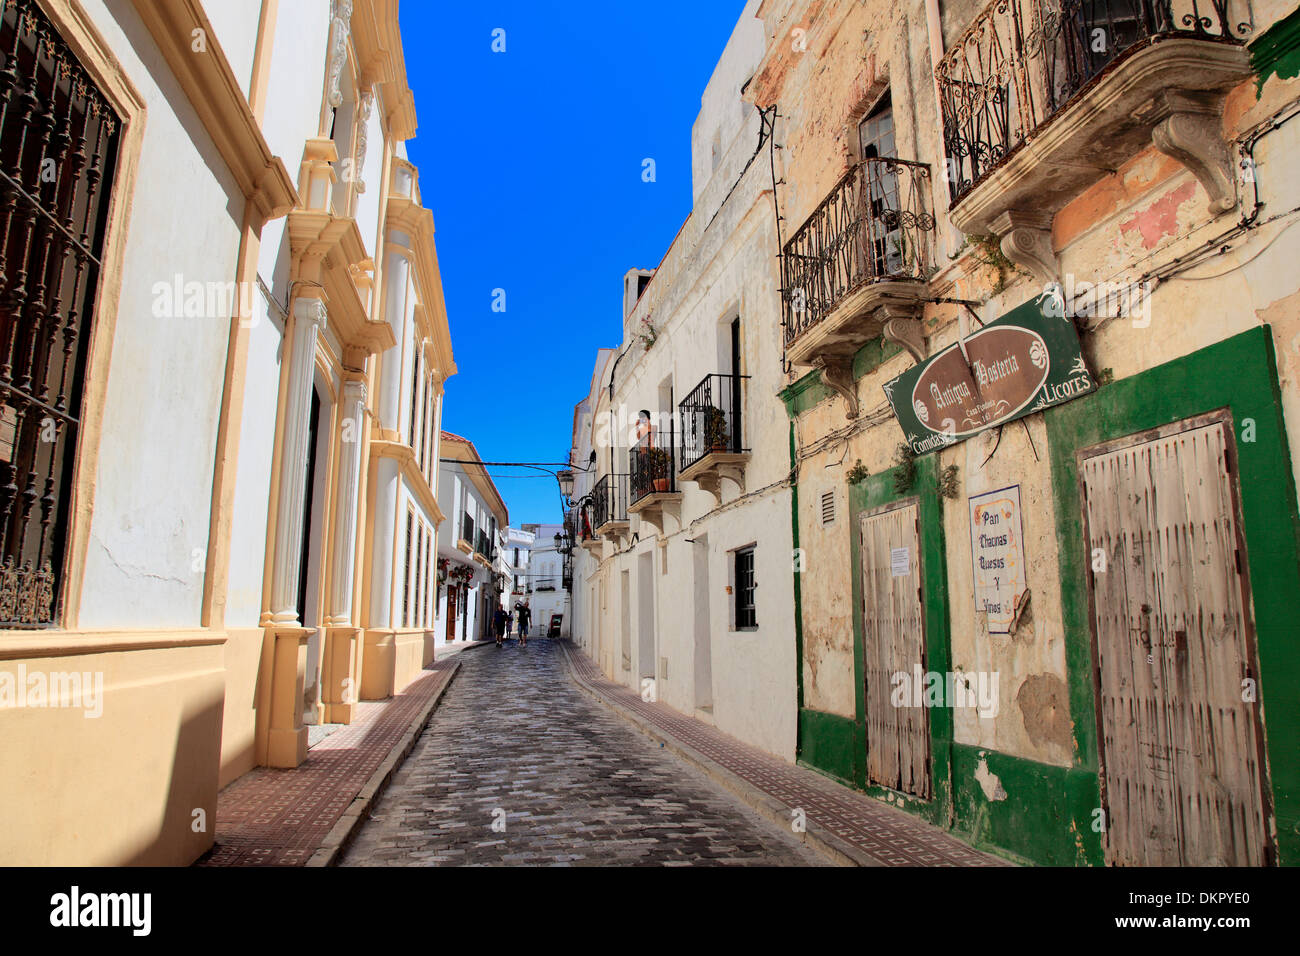 Street in old town, Pueblo bianco, Andalusia, Spain Stock Photo